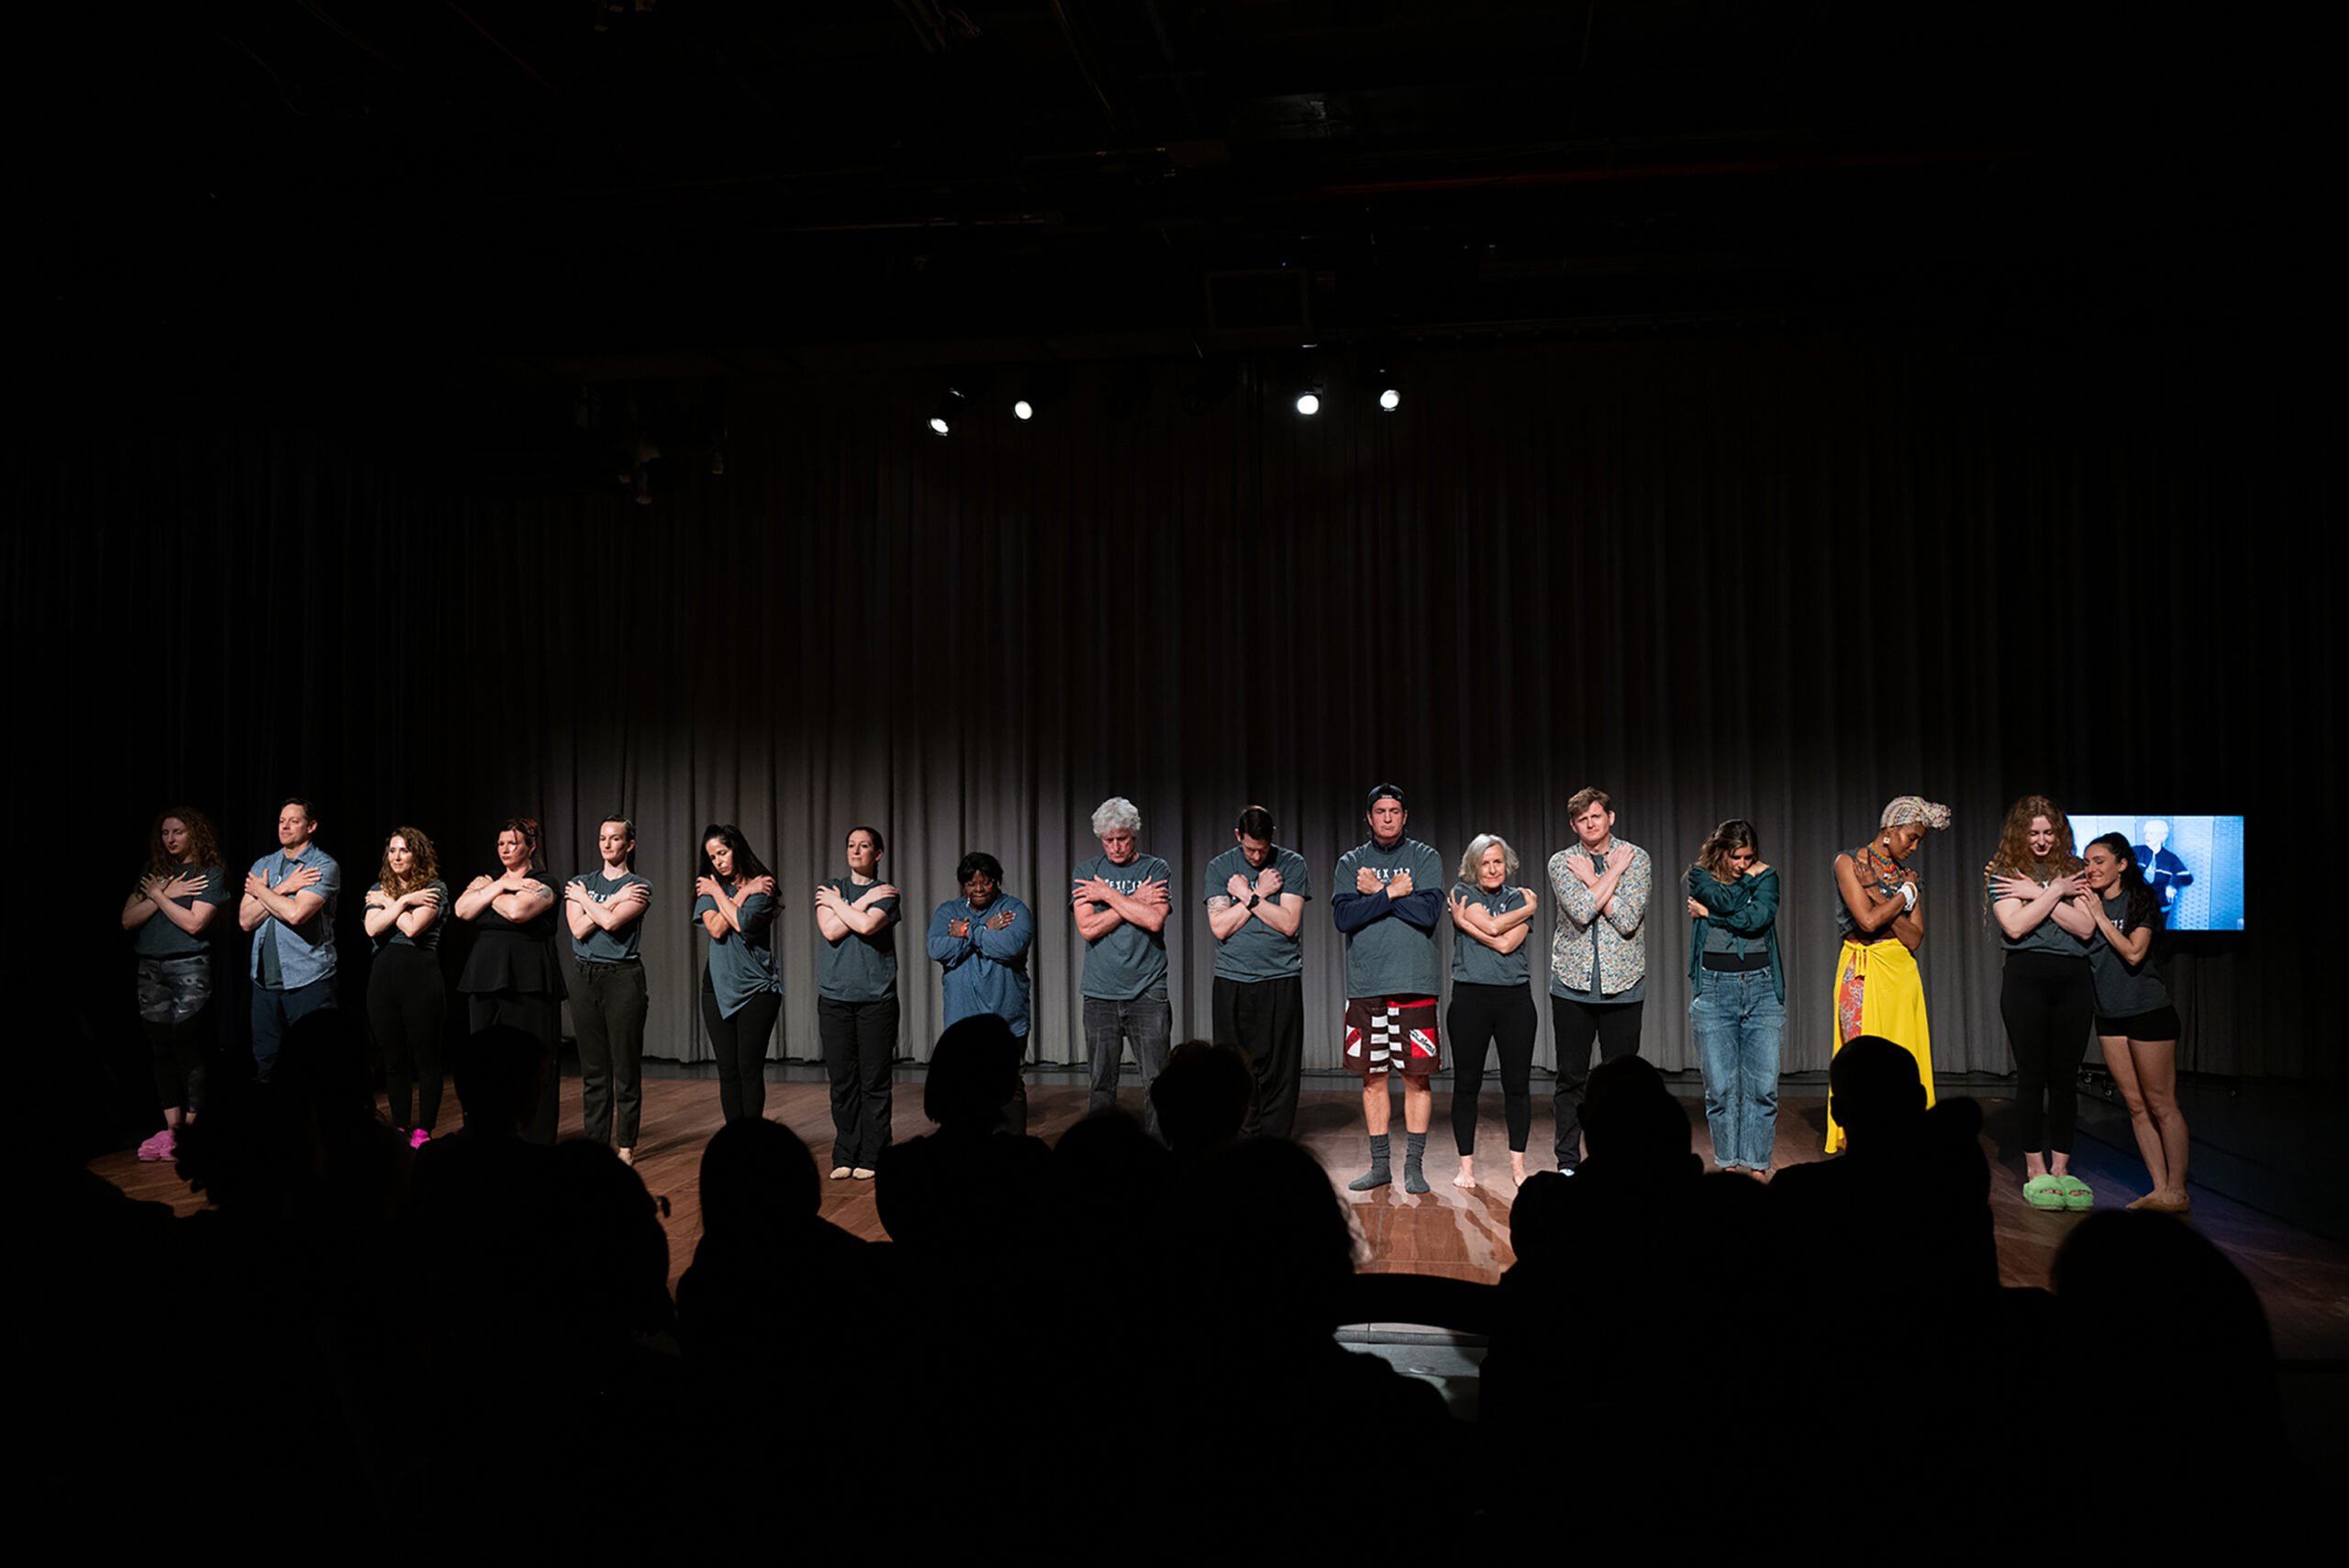 A diverse group of people stand in a line across a stage, with the audience in shadow in the foreground. They hold their arms crossed in front of them.